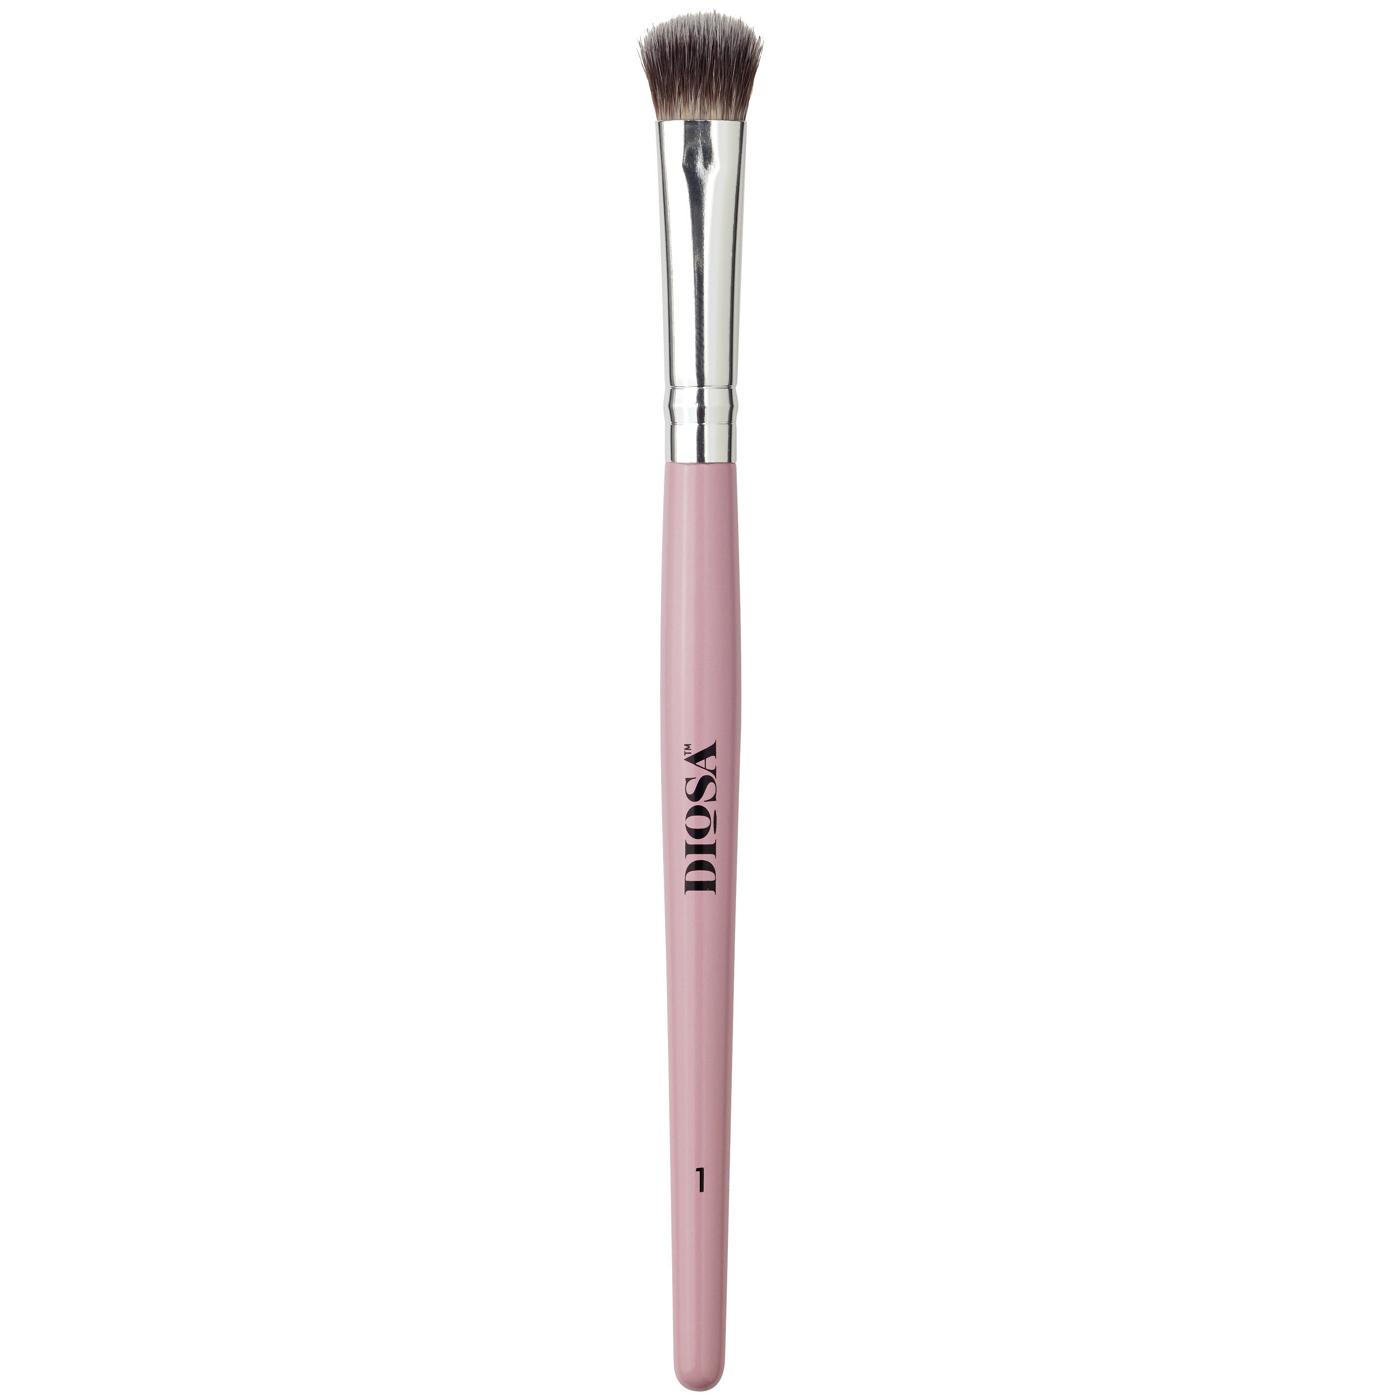 Diosa All Over Eye Brush - 1; image 2 of 2